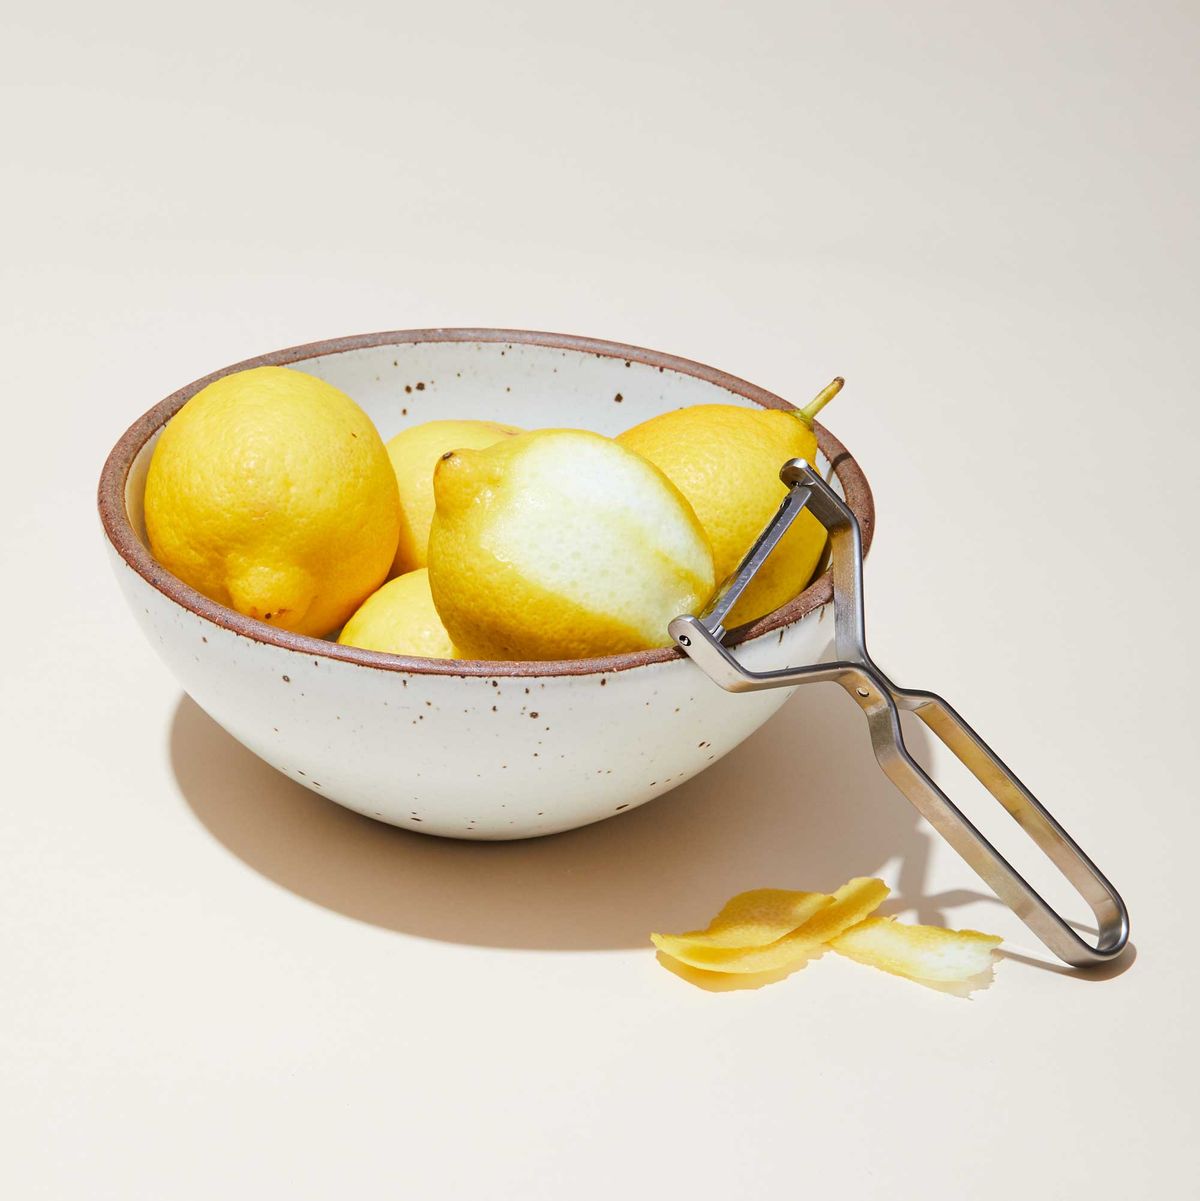 Lemons in an East Fork bowl, one peeled a bit with a metal peeler nearby